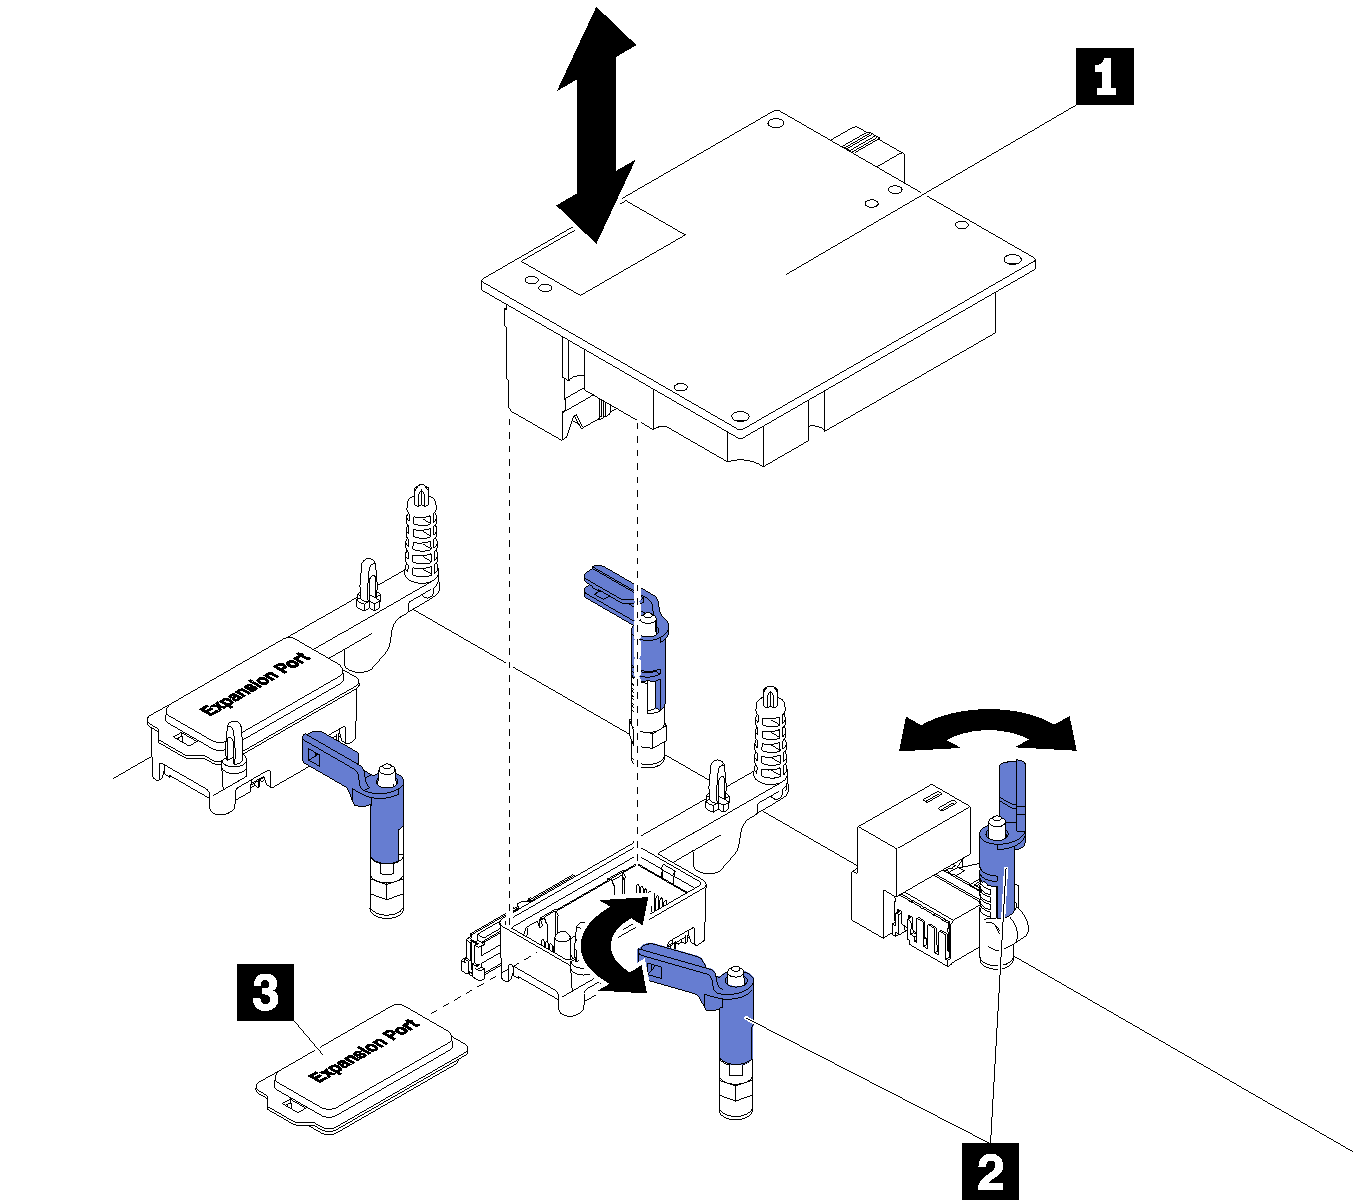 Graphic illustrating installing an I/O expansion adapter